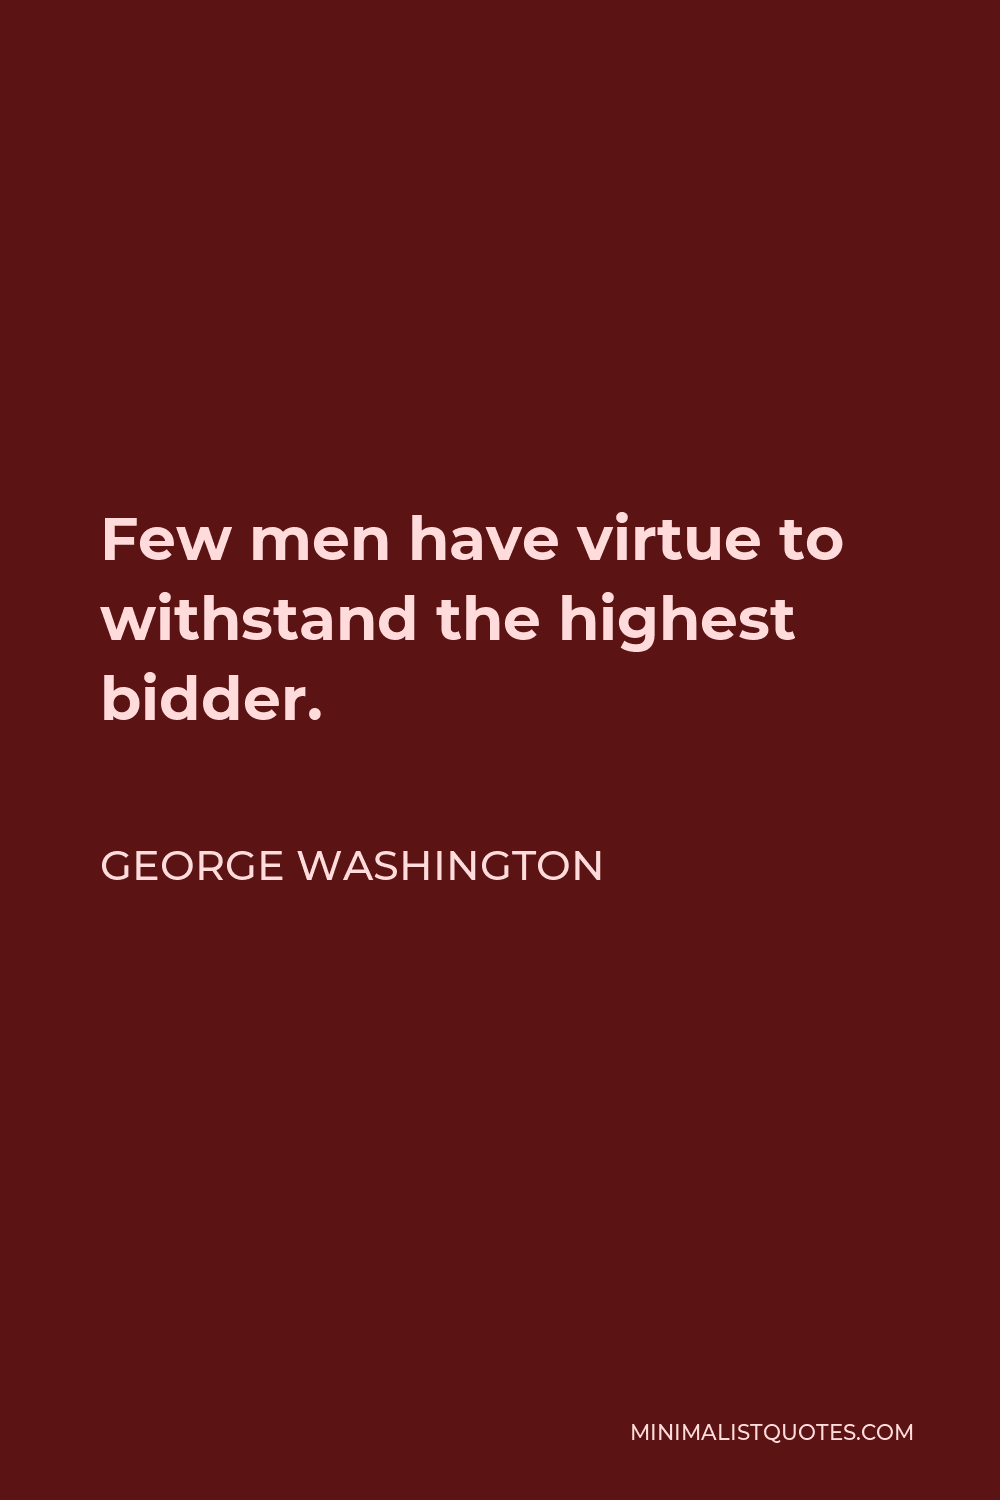 George Washington Quote - Few men have virtue to withstand the highest bidder.